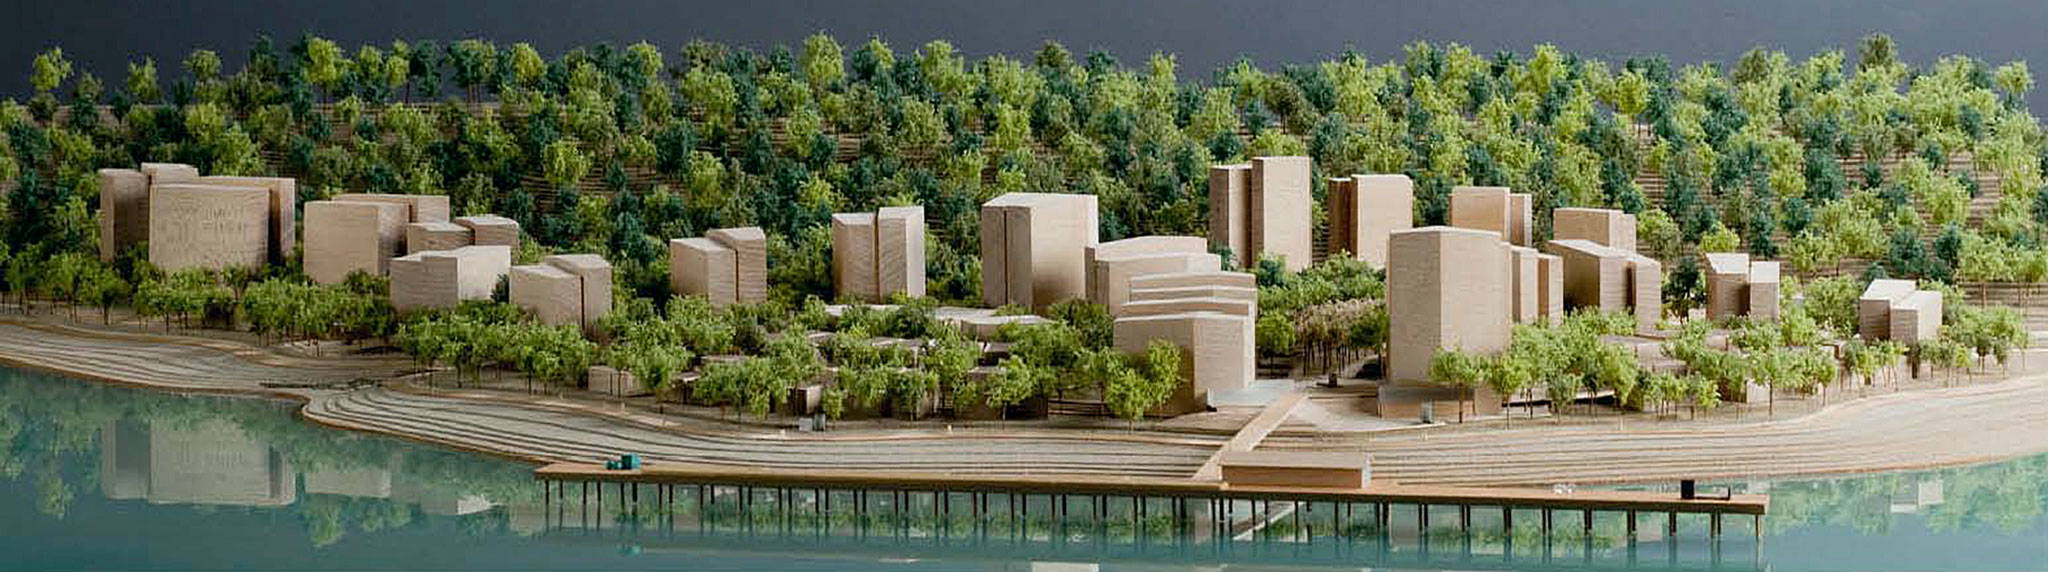 An architectural model of the planned development of 3,080 waterfront condos at Point Wells near Woodway. (Blue Square Real Estate)